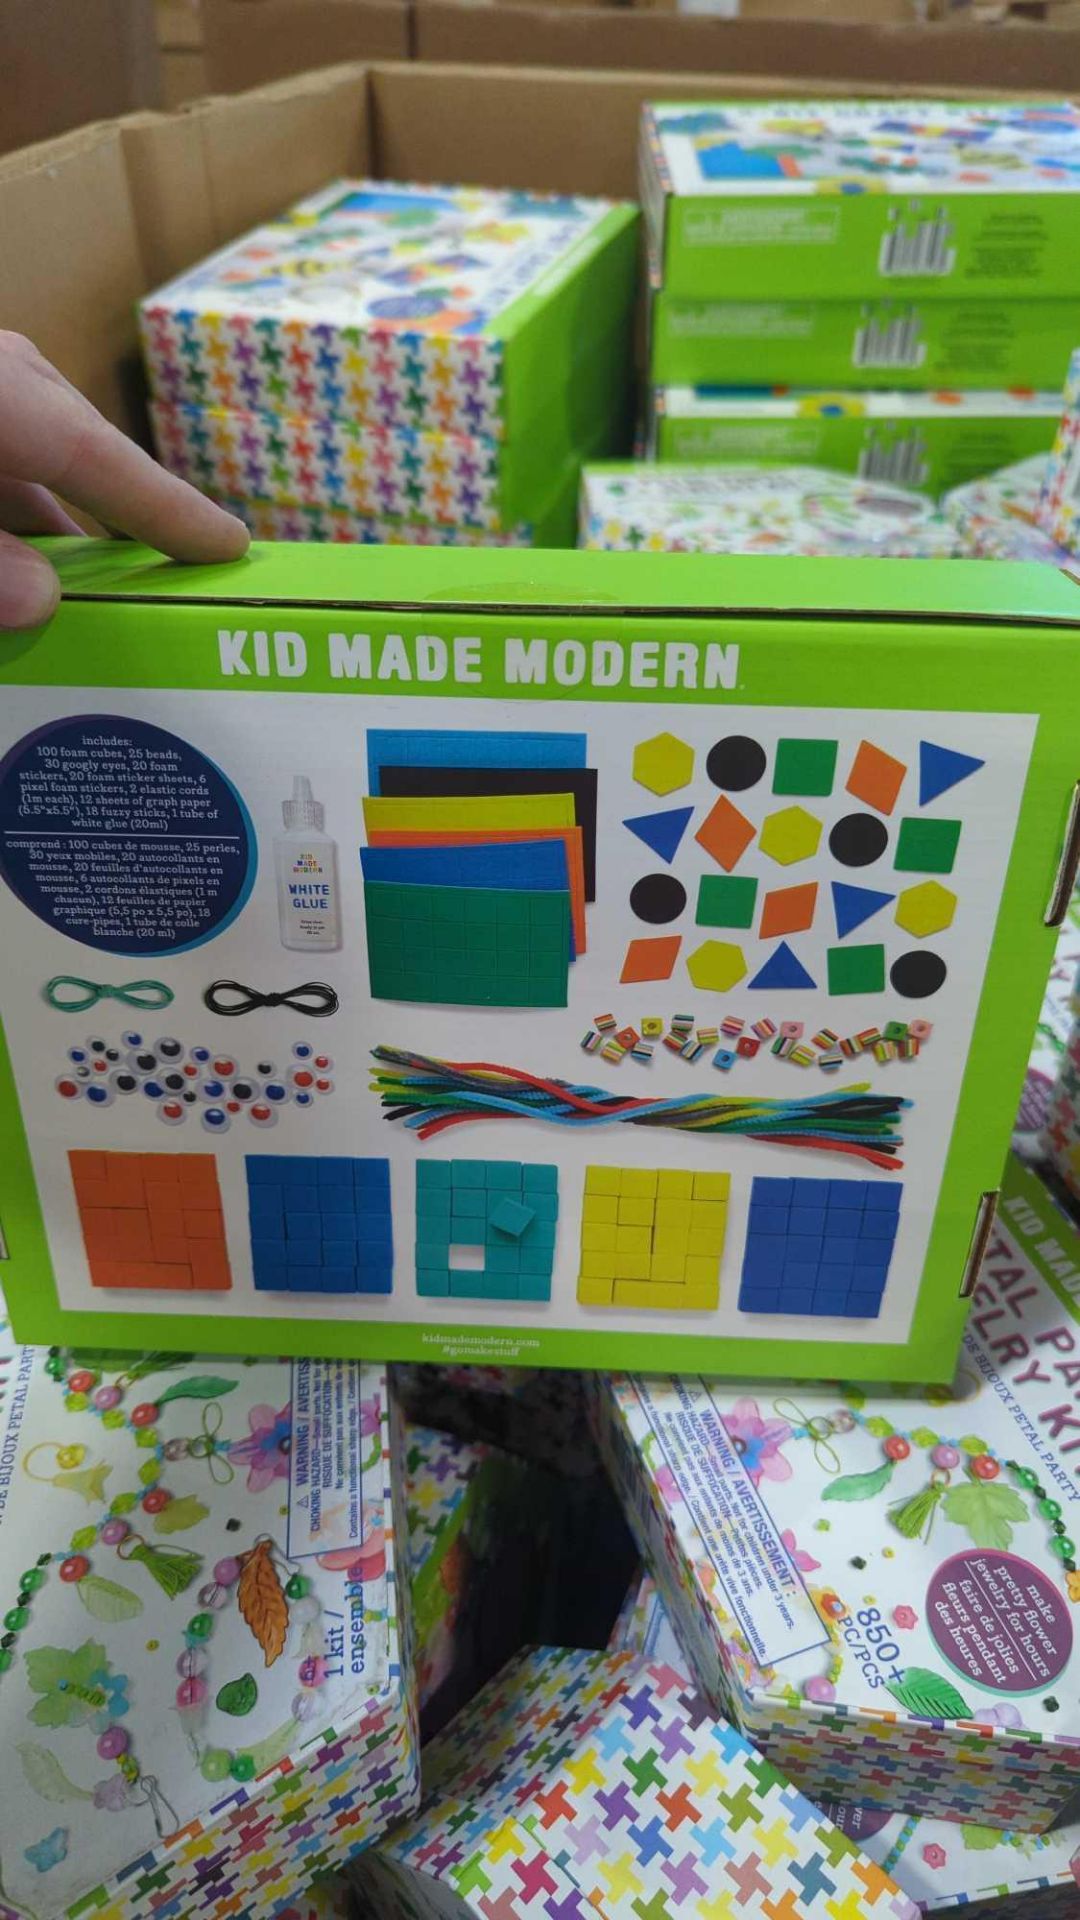 GL kid made modern pedal party jewelry kit and 8-bit craft kit approximately 280 total pieces - Image 3 of 6